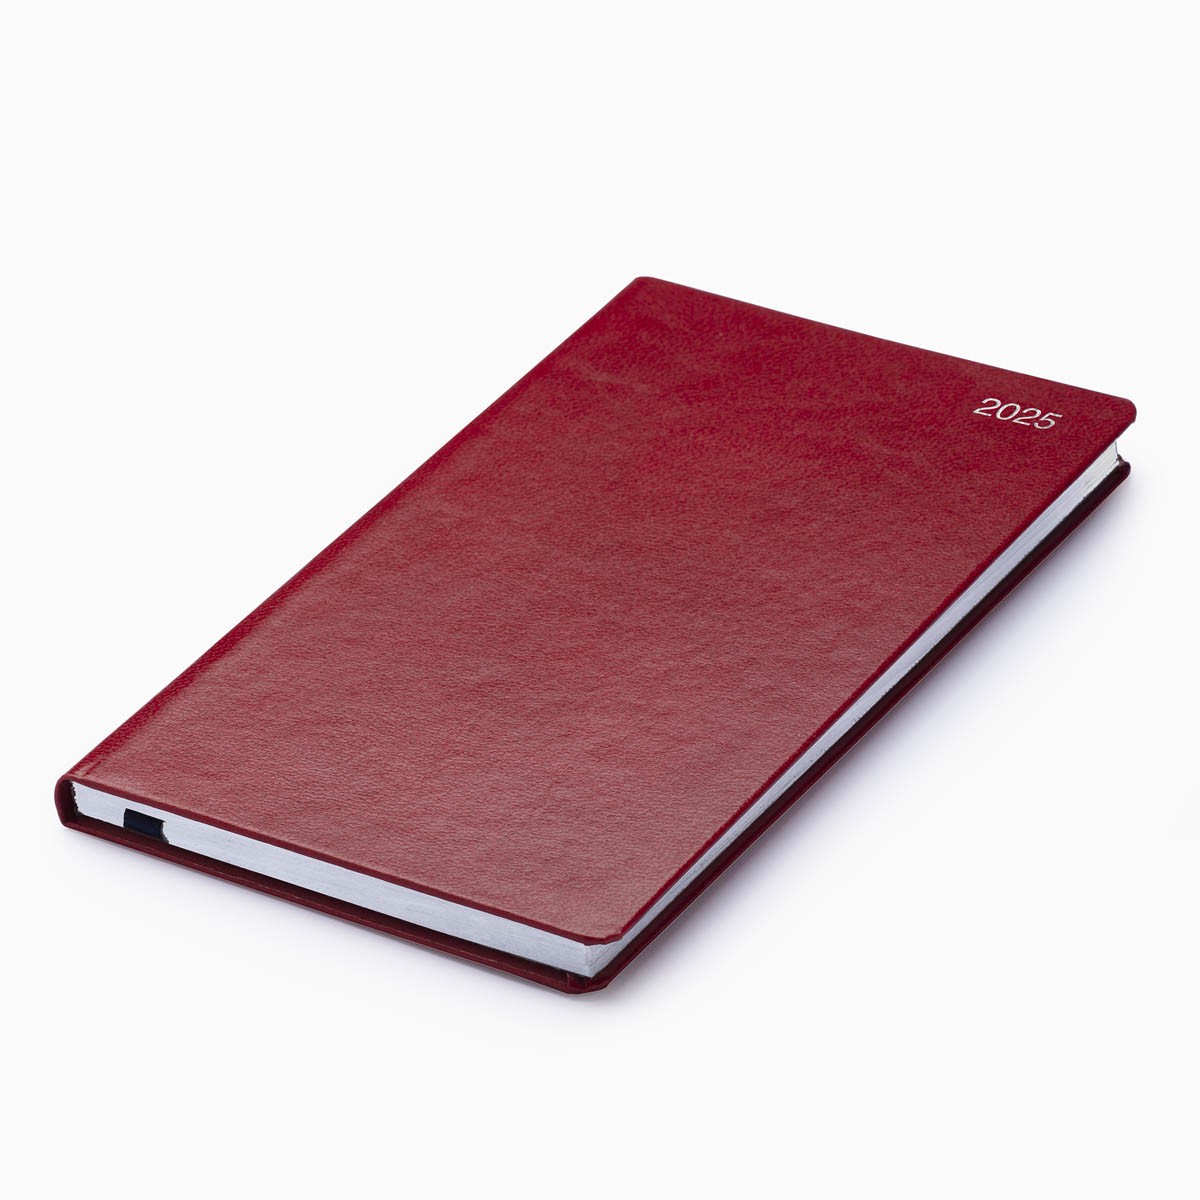 Strata Deluxe Pocket Diary - White Pages